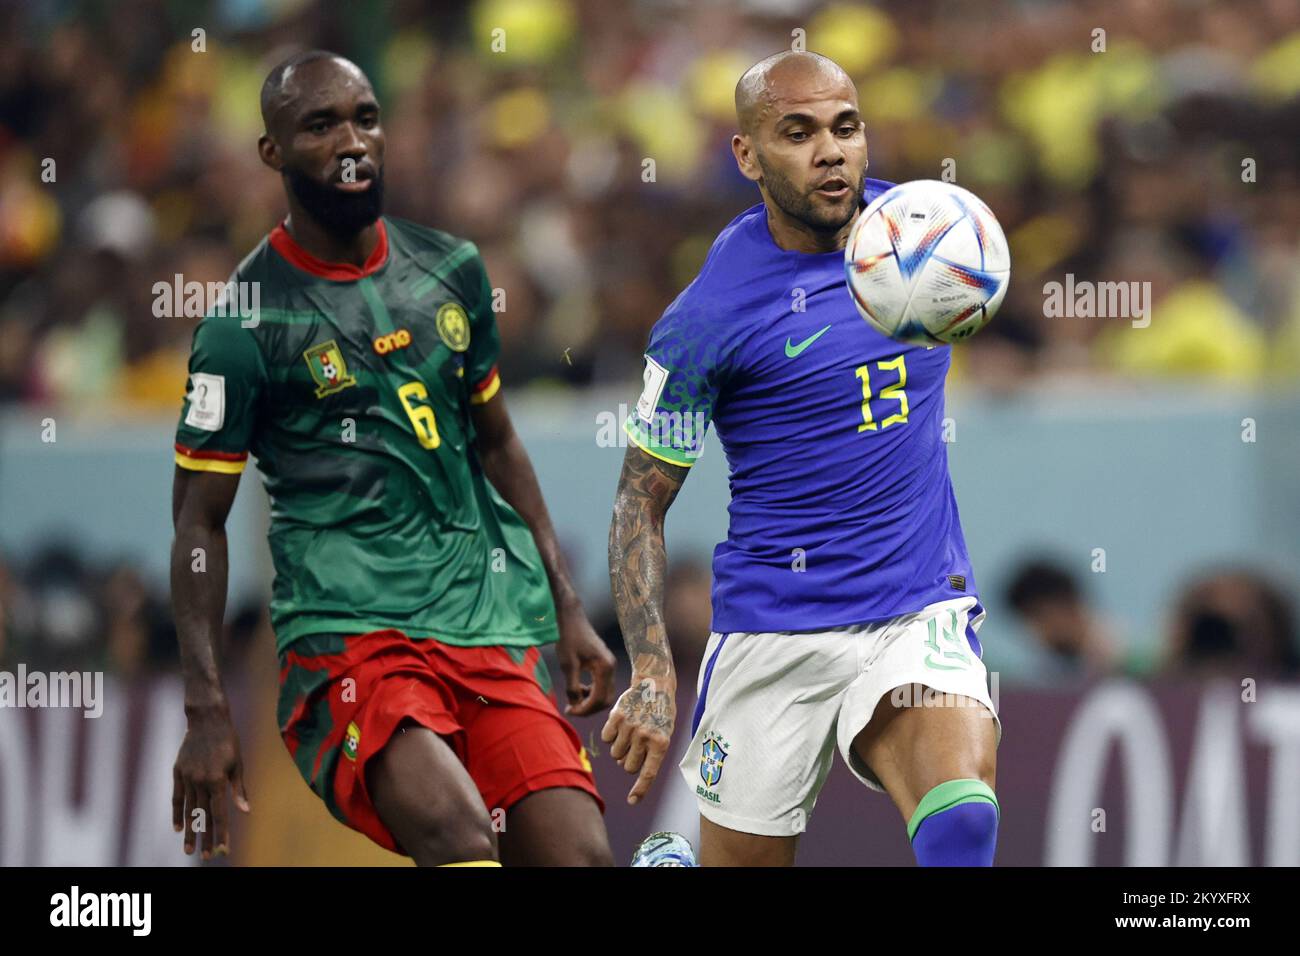 Qatar. 02nd Dec, 2022. LUSAIL CITY - (l-r) Nicolas Ngamaleu of Cameroon, Dani Alves of Brazil during the FIFA World Cup Qatar 2022 group G match between Cameroon and Brazil at Lusail Stadium on December 2, 2022 in Lusail City, Qatar. AP | Dutch Height | MAURICE OF STONE Credit: ANP/Alamy Live News Stock Photo